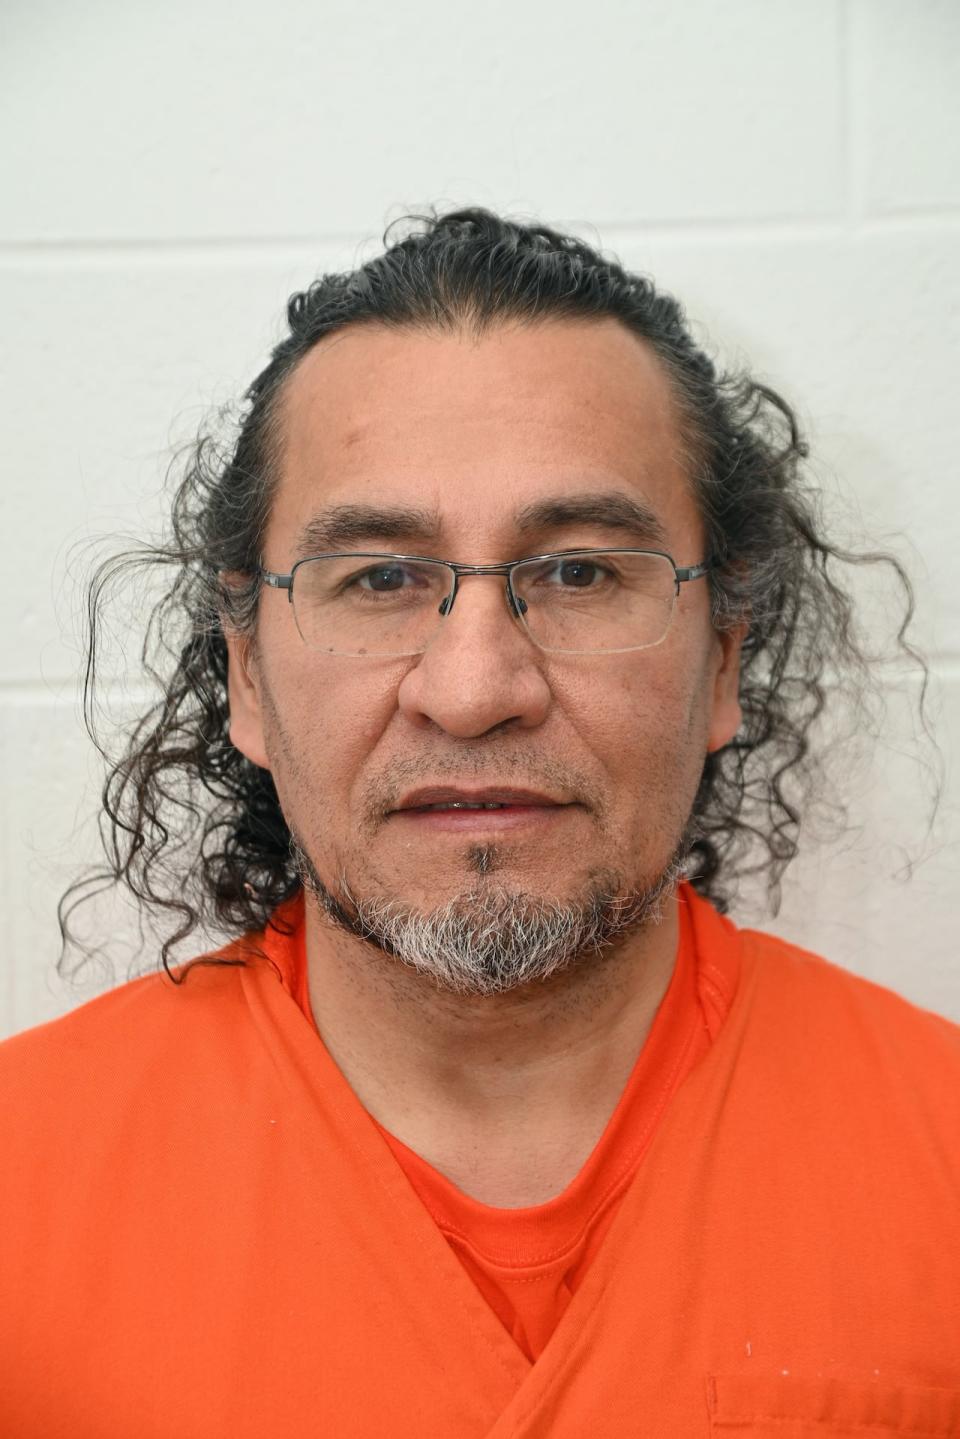 Joseph George Sutherland, 61, of Moosonee, Ont., was convicted of second-degree murder in connection with the killings of Susan Tice and Erin Gilmour in 1983. (Toronto Police Service - image credit)